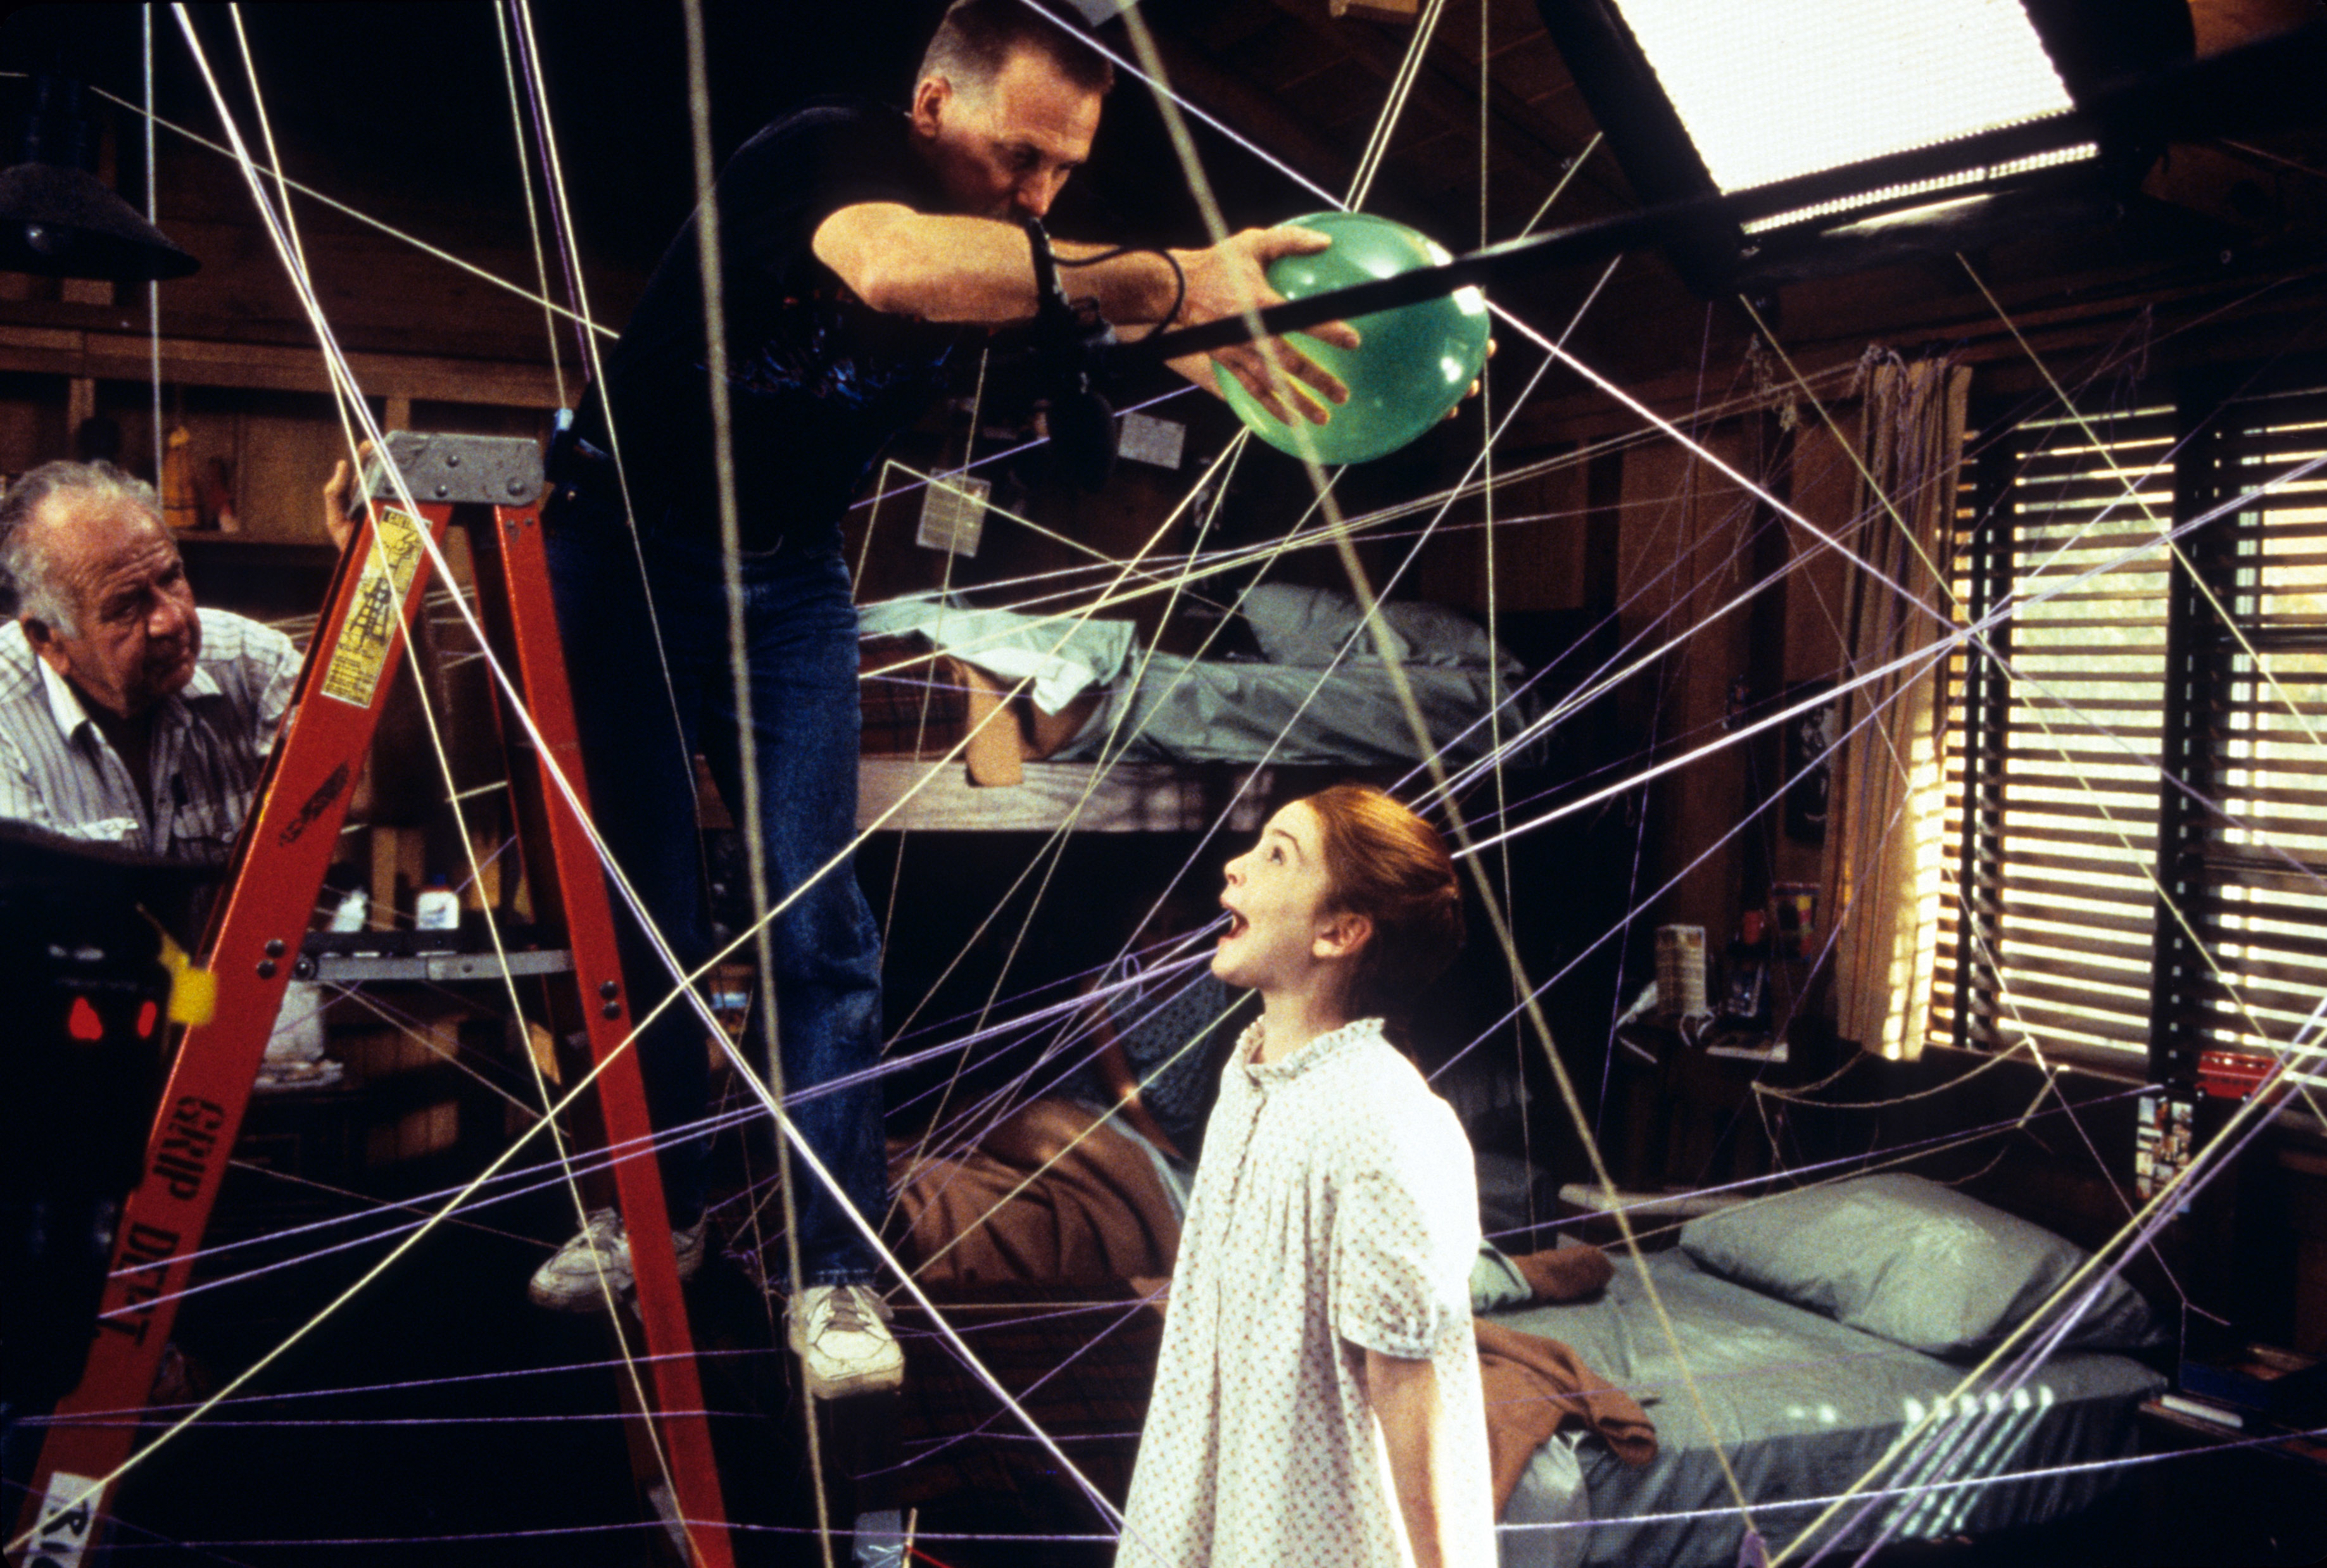 Dana Carvey and young Juliette Brewer in a behind-the-scenes moment from the film &quot;Clean Slate,&quot; with a crew member adjusting a green balloon in a web of strings